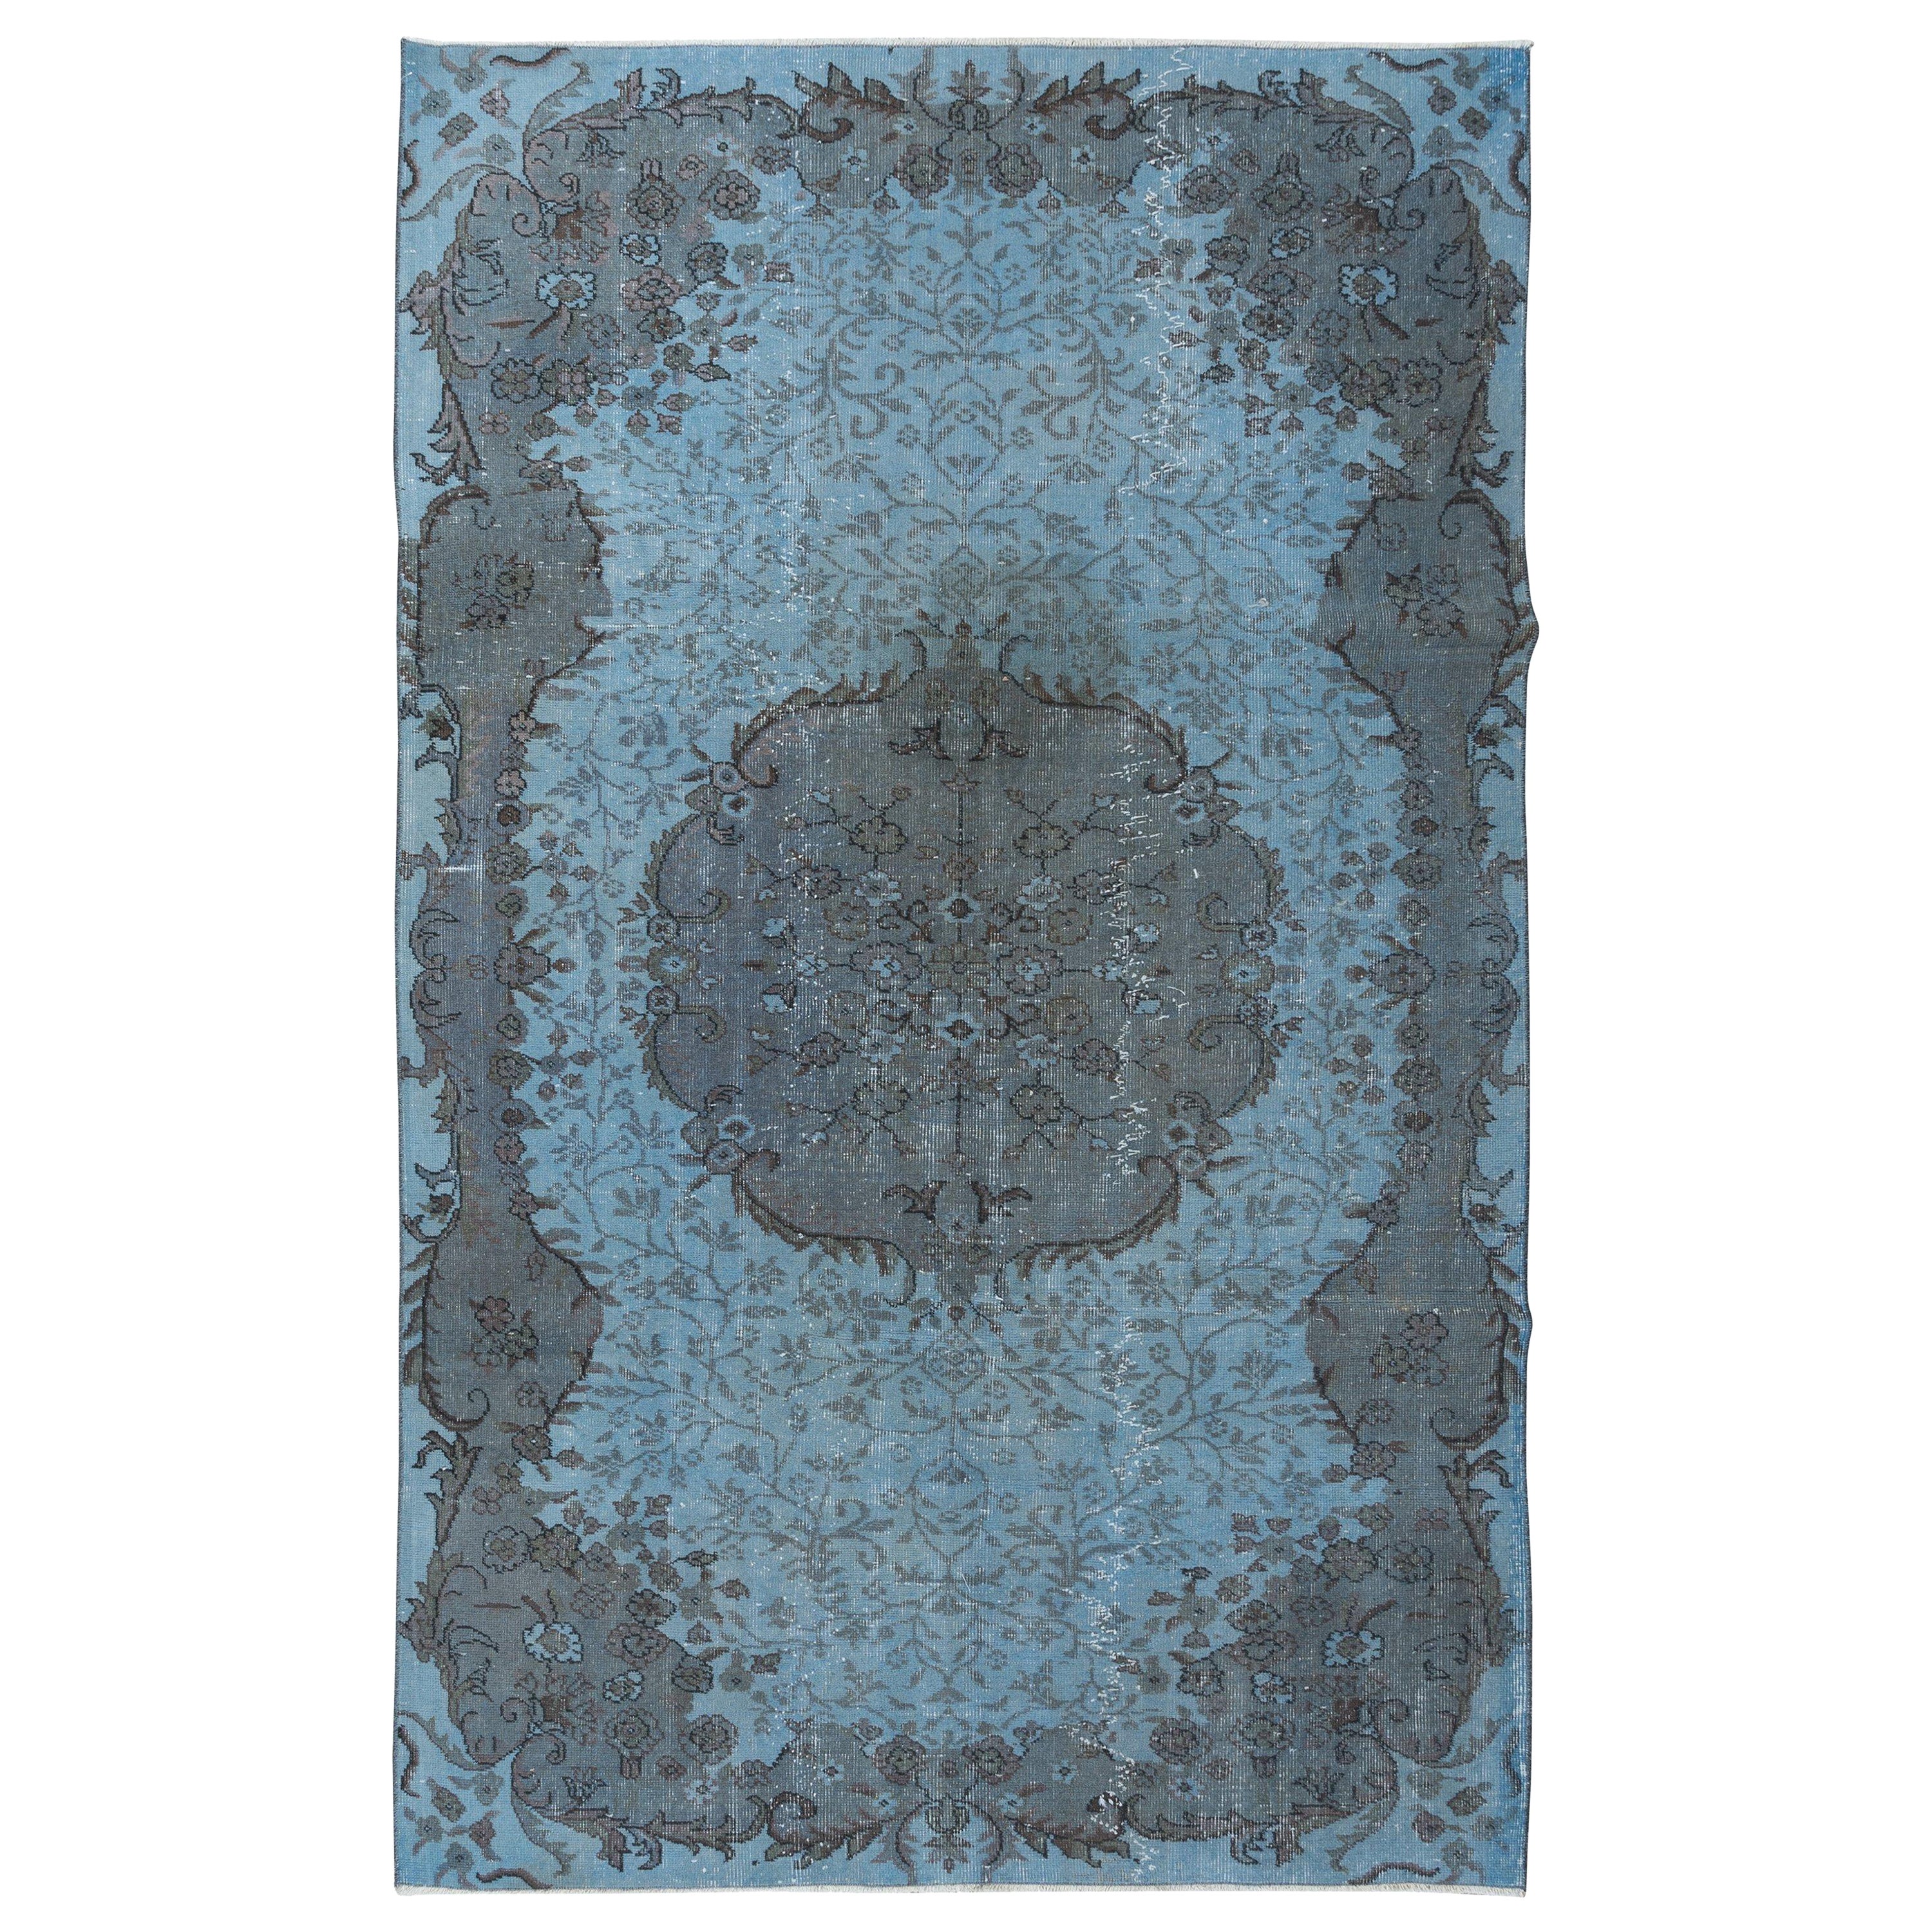 5.5x8.5 Ft Sky Blue Modern Area Rug, Handwoven & Handknotted in Isparta, Turkey